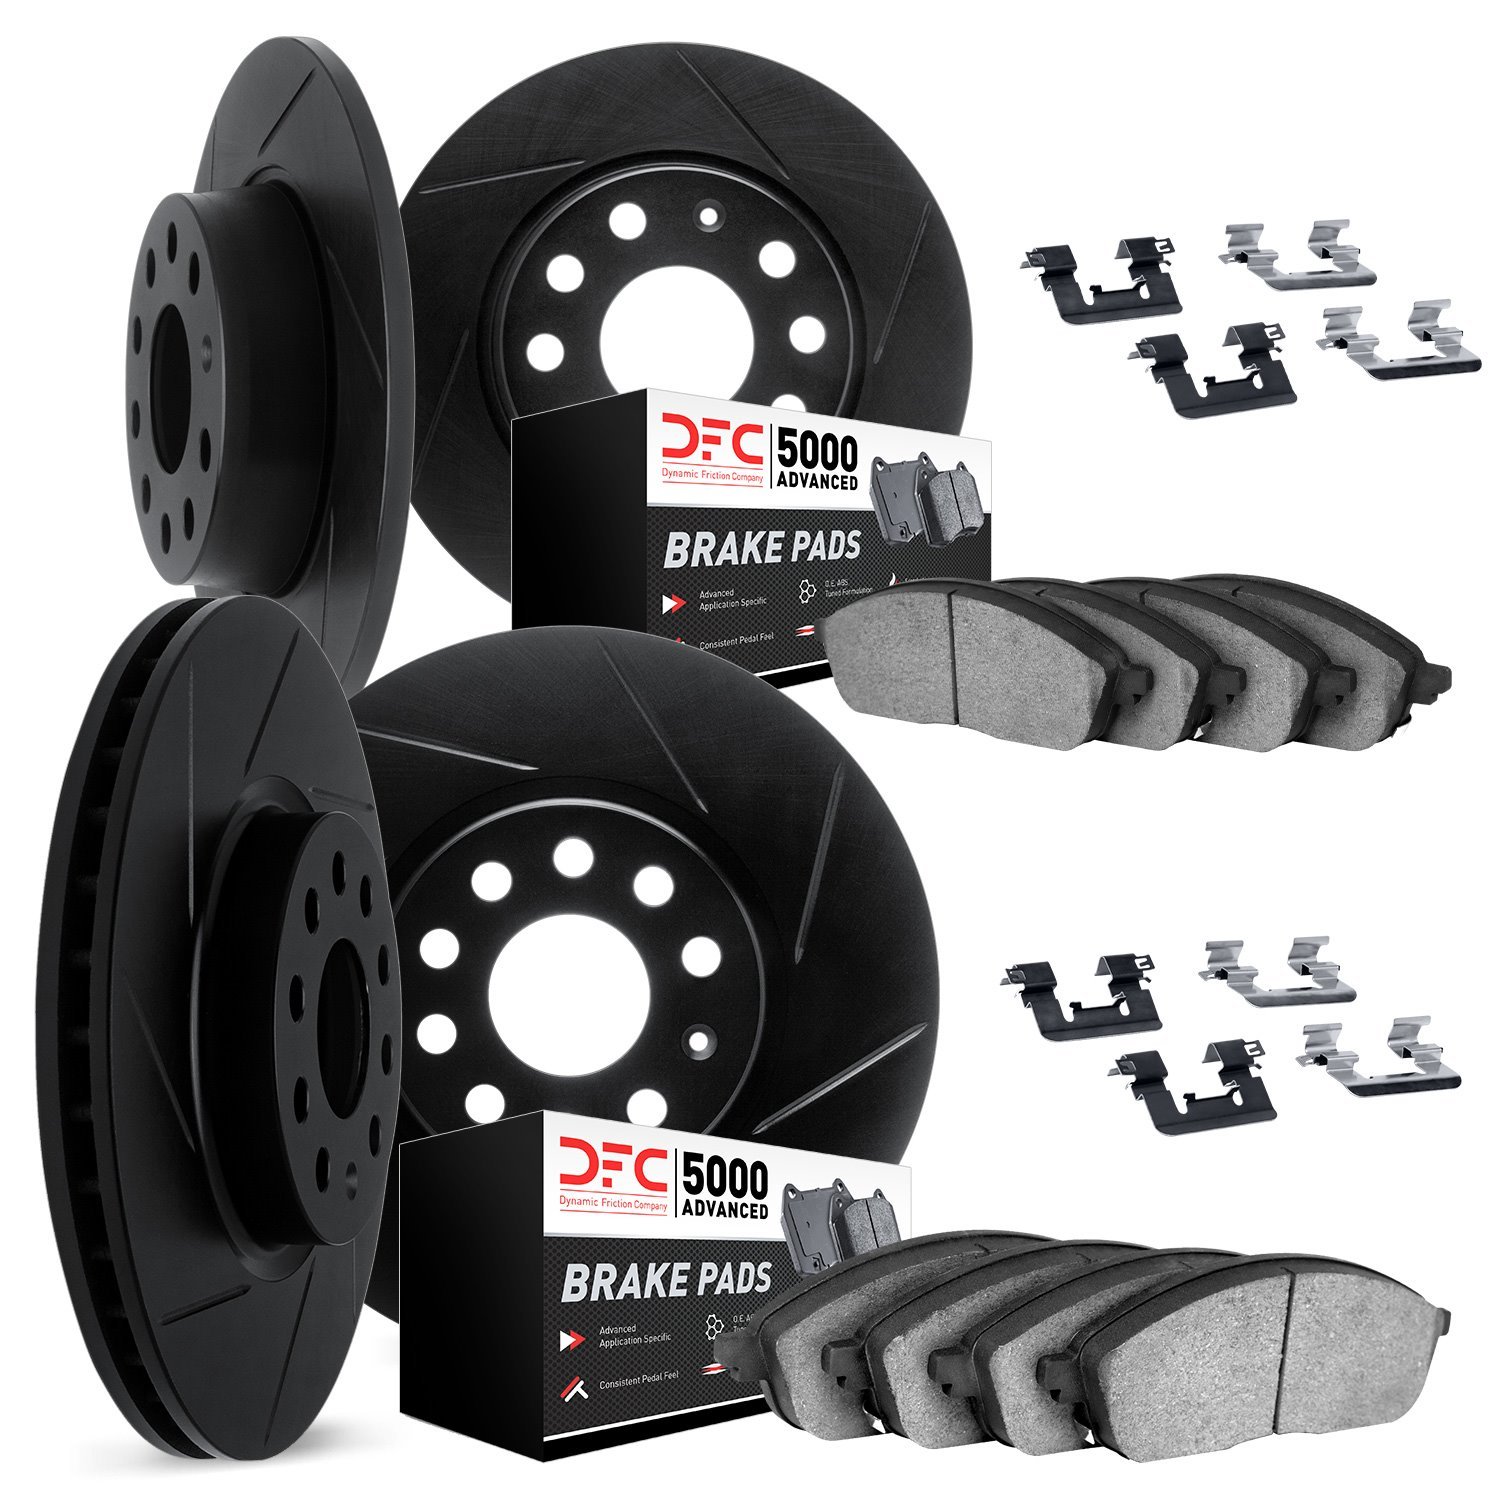 3514-59086 Slotted Brake Rotors w/5000 Advanced Brake Pads Kit & Hardware [Black], 2017-2019 Acura/Honda, Position: Front and Re